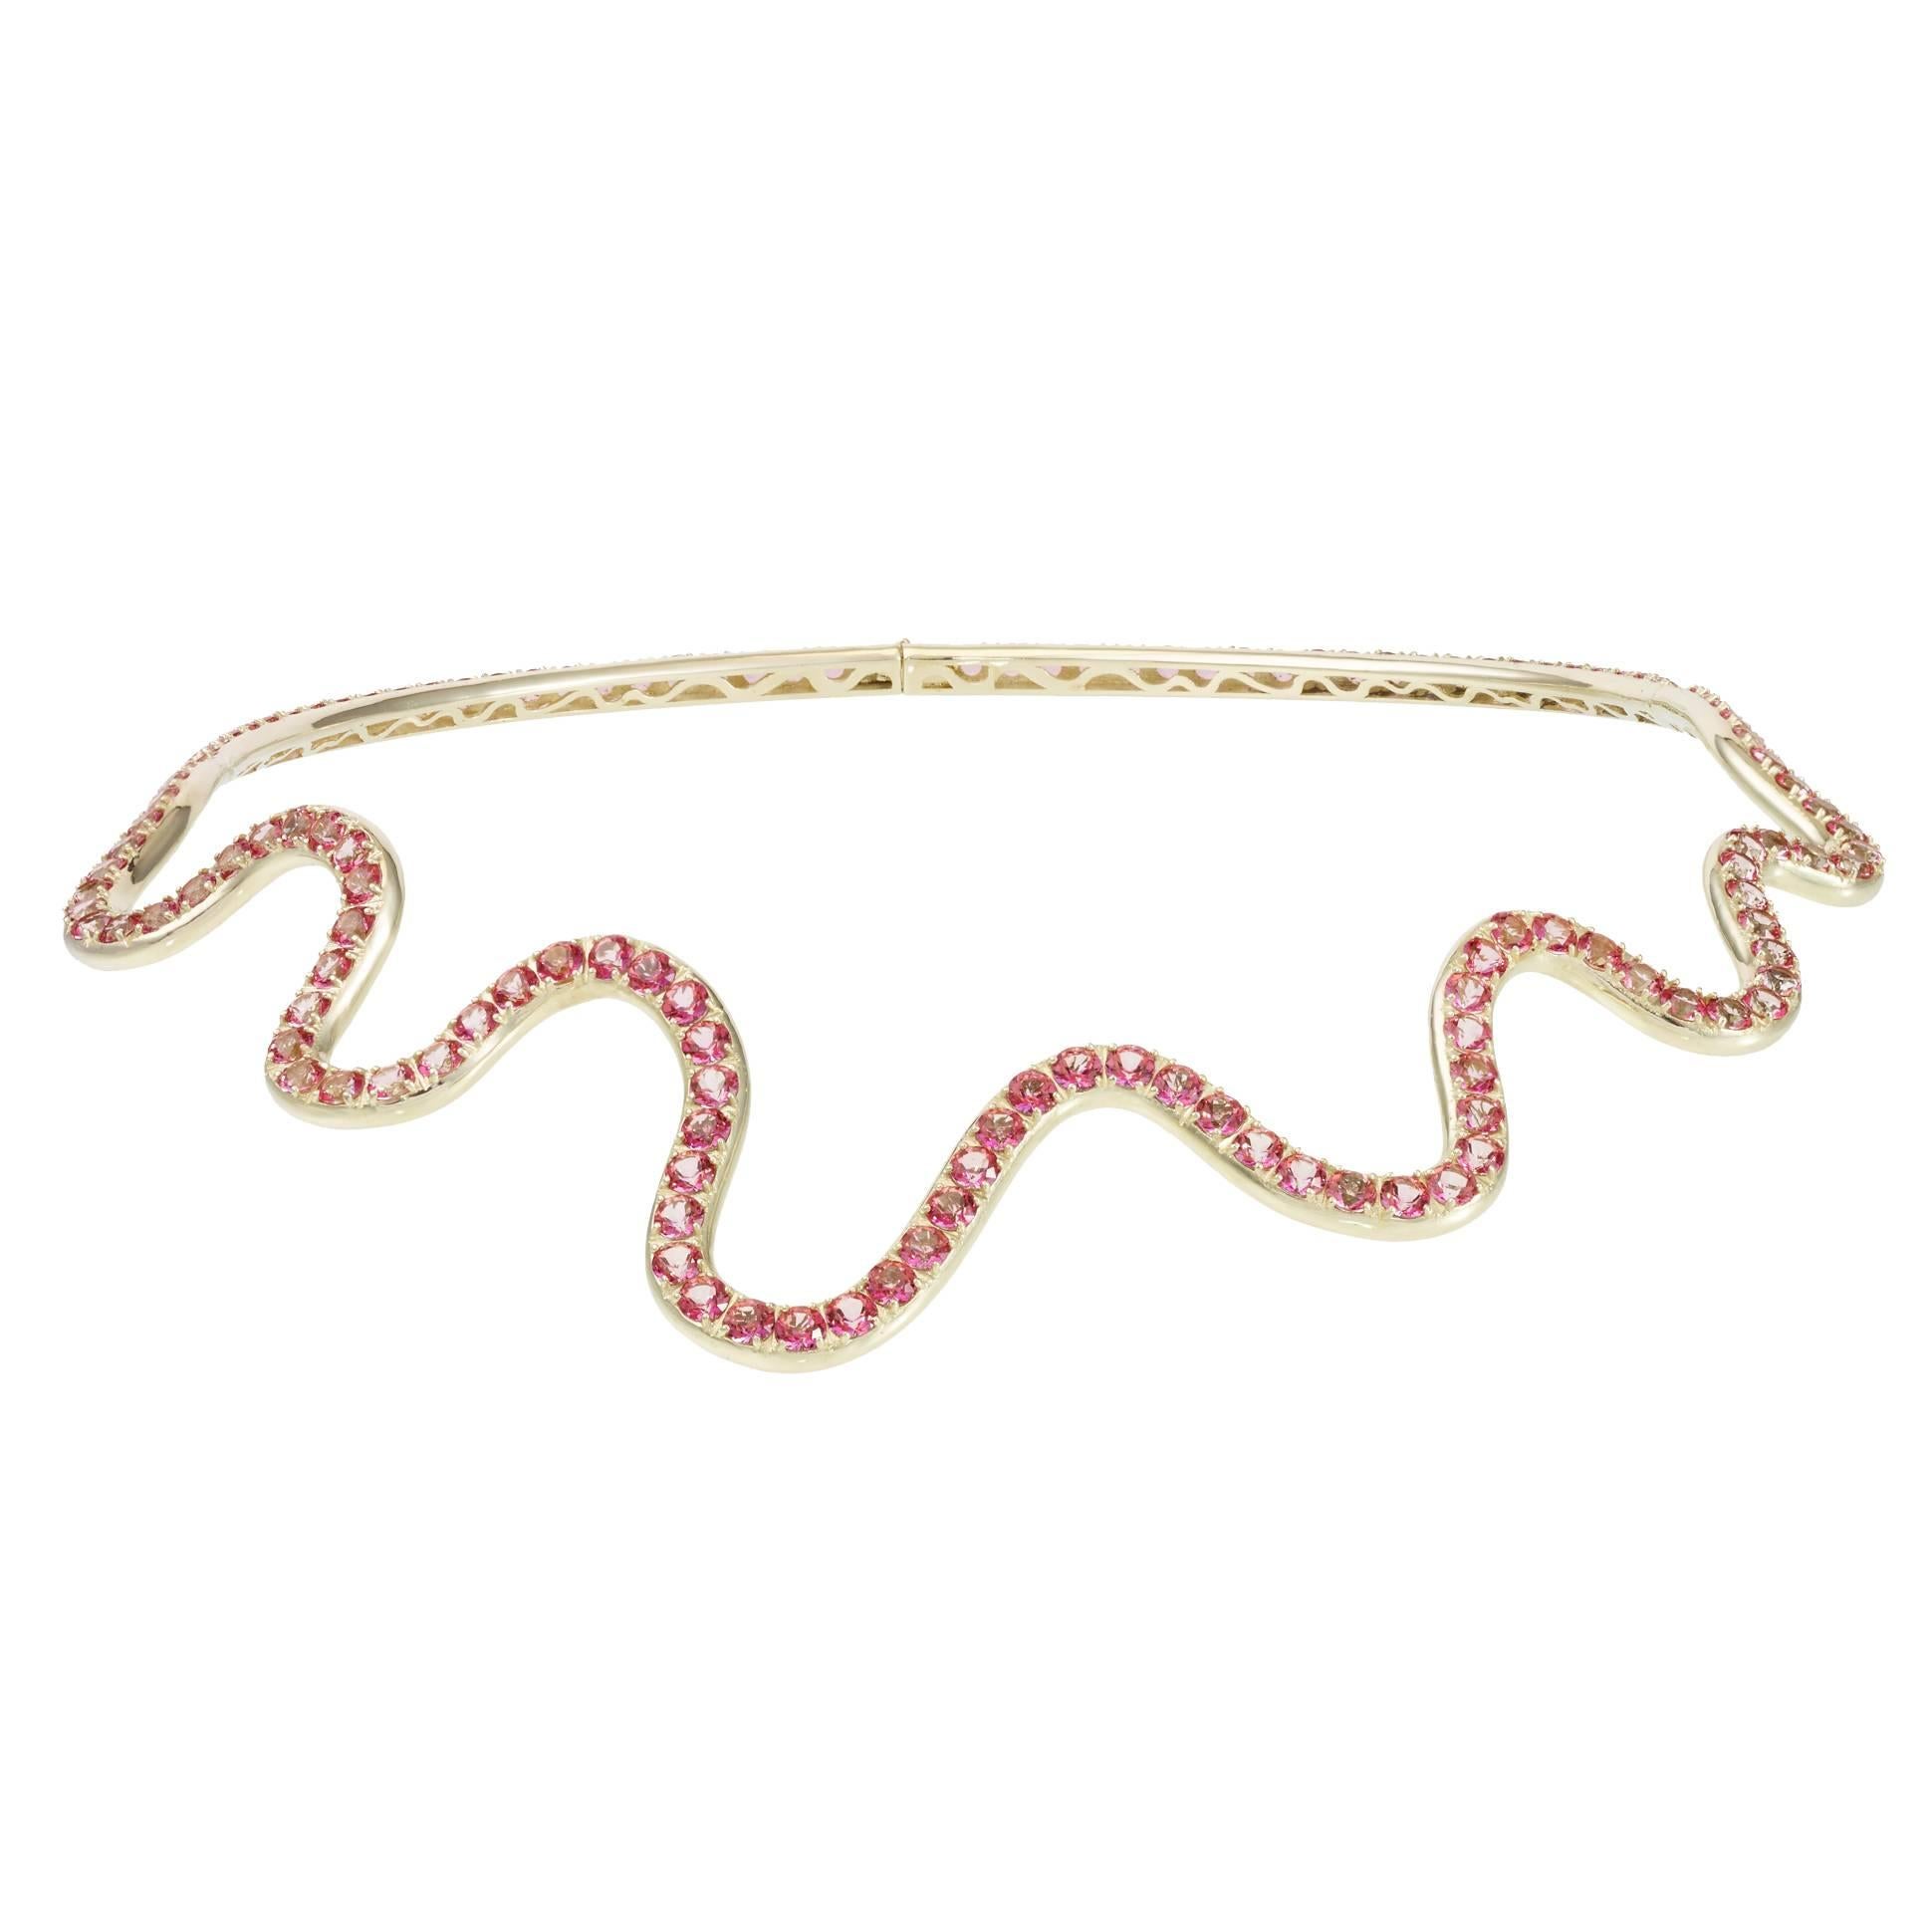 *MADE TO ORDER - 5 WEEK LEAD TIME*

Sabine Getty wiggly necklace in 18k yellow gold set with pink topaz.

Topaz: 38.57ct

Yellow, pink, green and blue. Four colours inspired by the Memphis Group, the kookiest of Made in Italy designers, for a